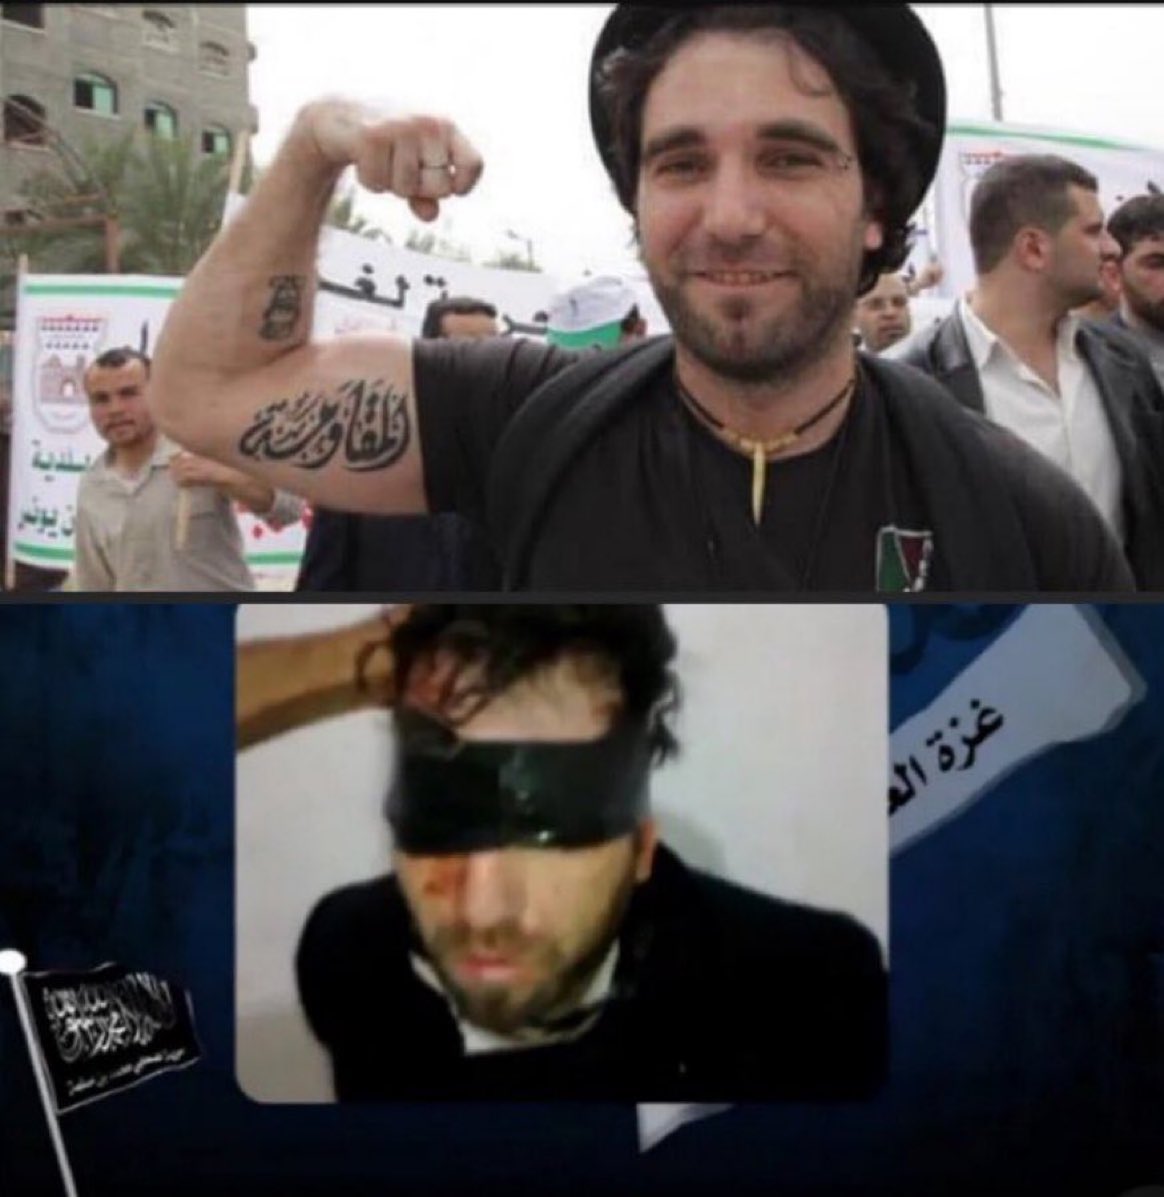 Vittorio Arrigoni was an Italian journalist and pro-Palestine activist. In 2008, he moved to Gaza to support Palestinians. He often received death threats, but ignored them. He claimed it was just the Mossad trying to scare him off. In 2011, he was kidnapped, tortured and…